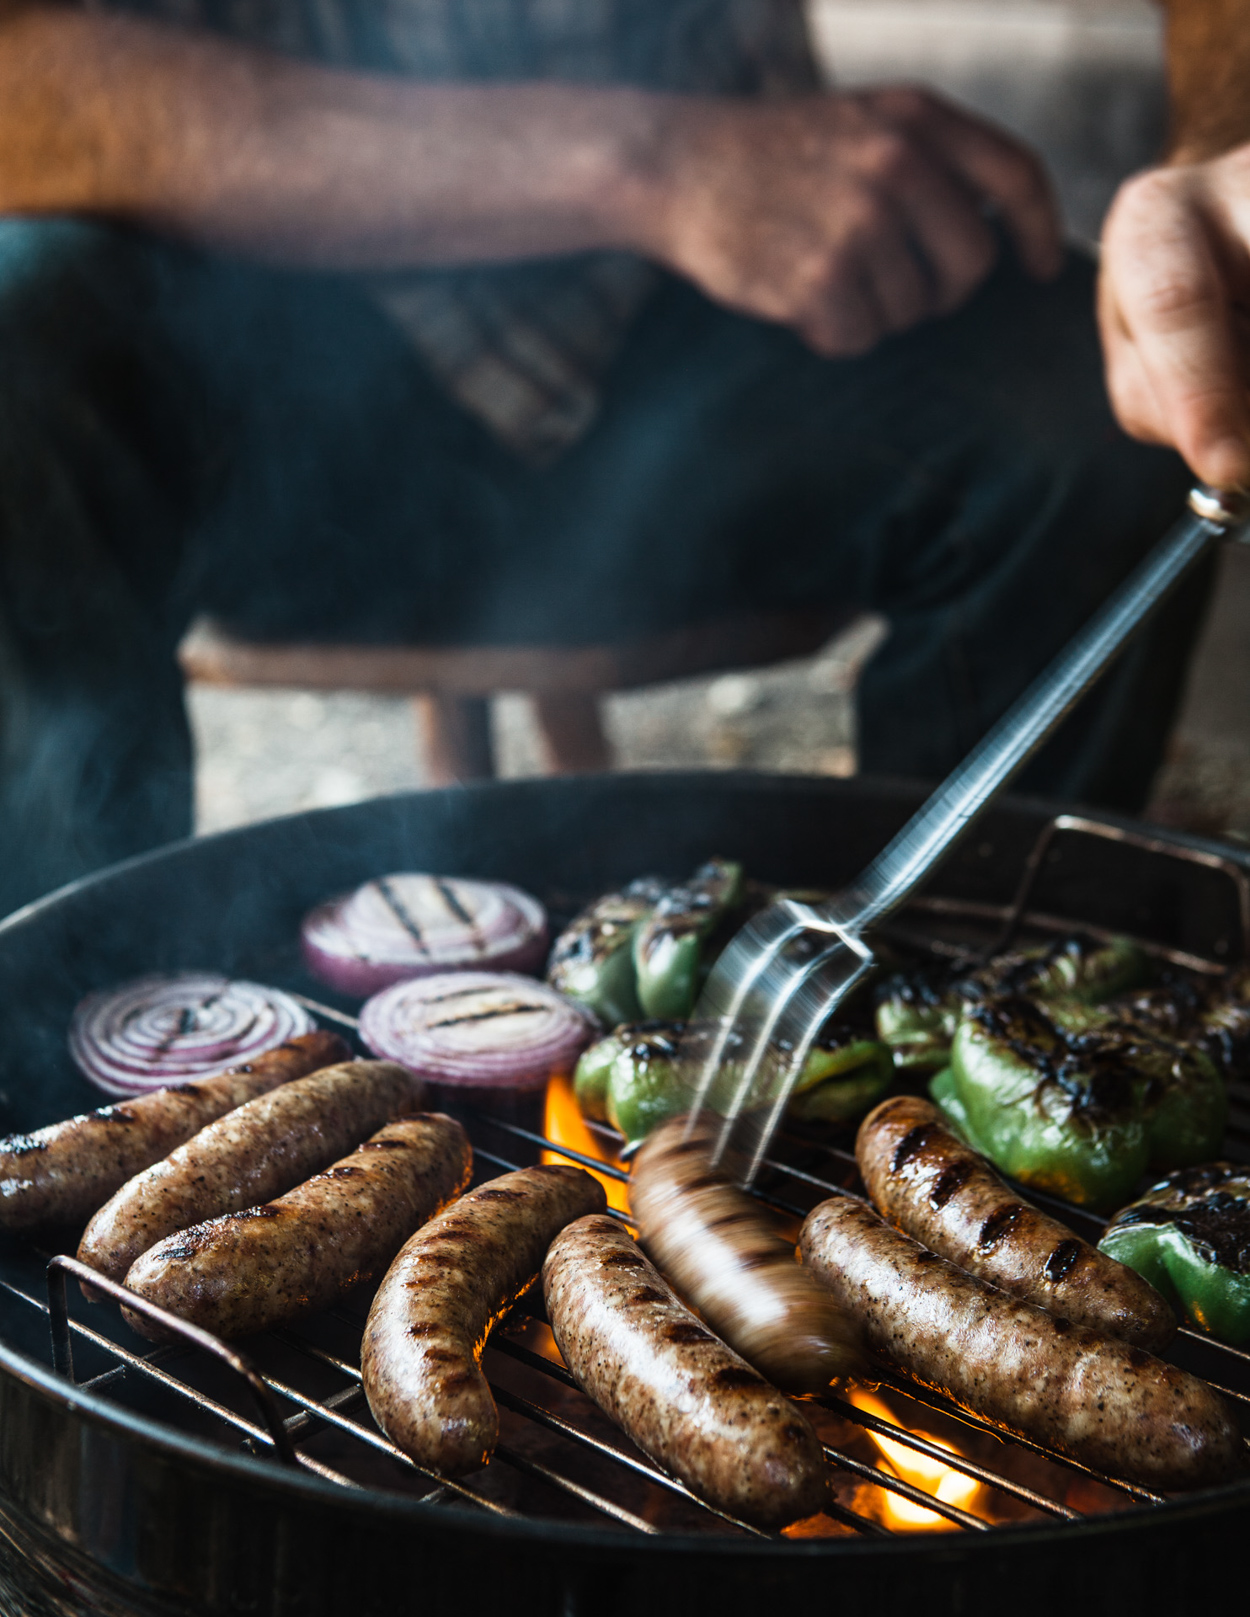 Los Angeles Food photographer - Grill Master Cookbook Brats by Ray Kachatorian